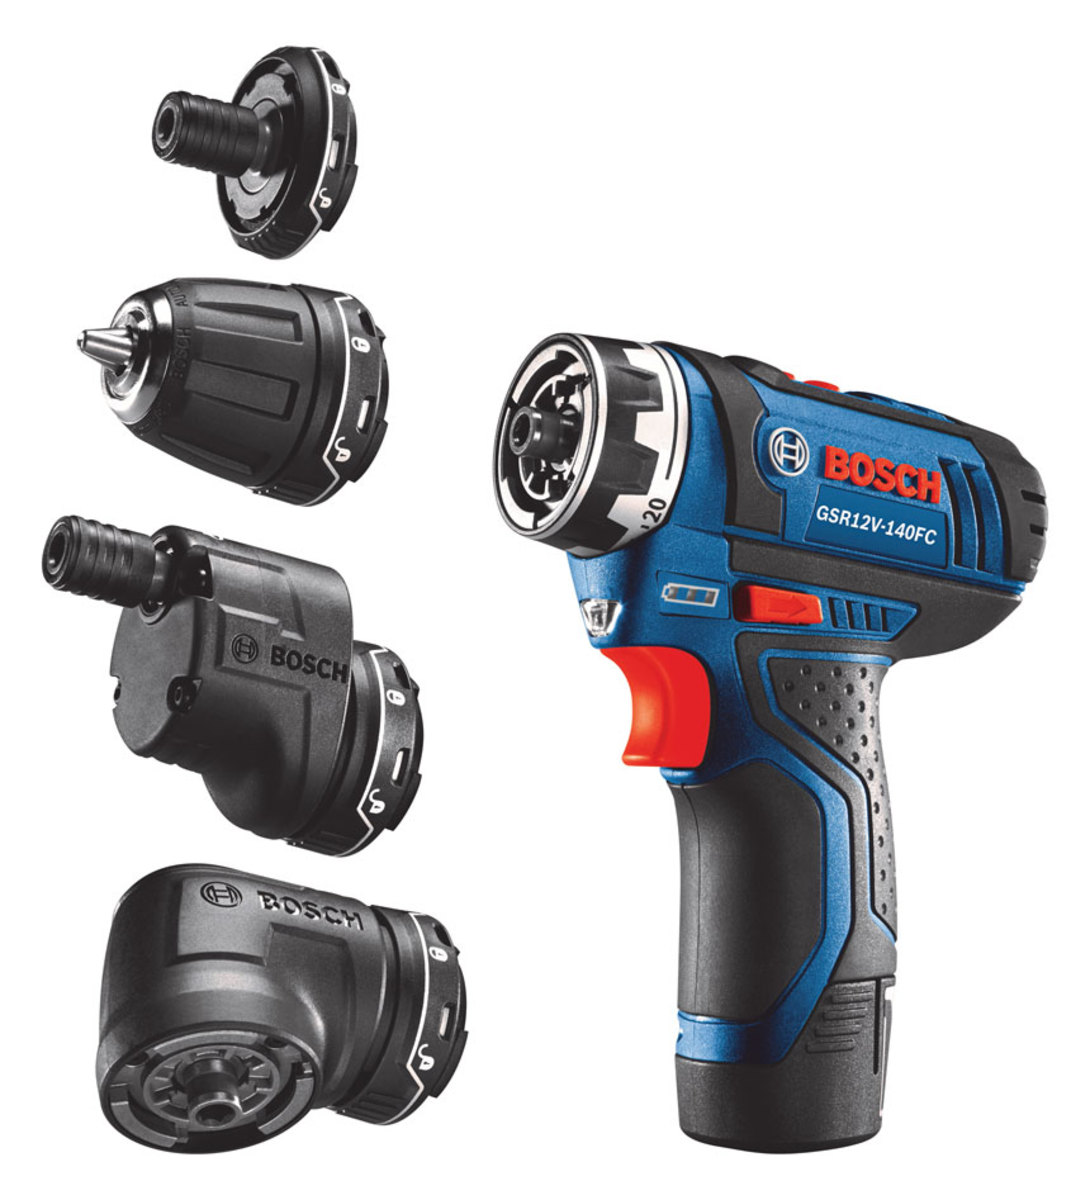 Photo of Bosch offer 5-in-1 drill/driver